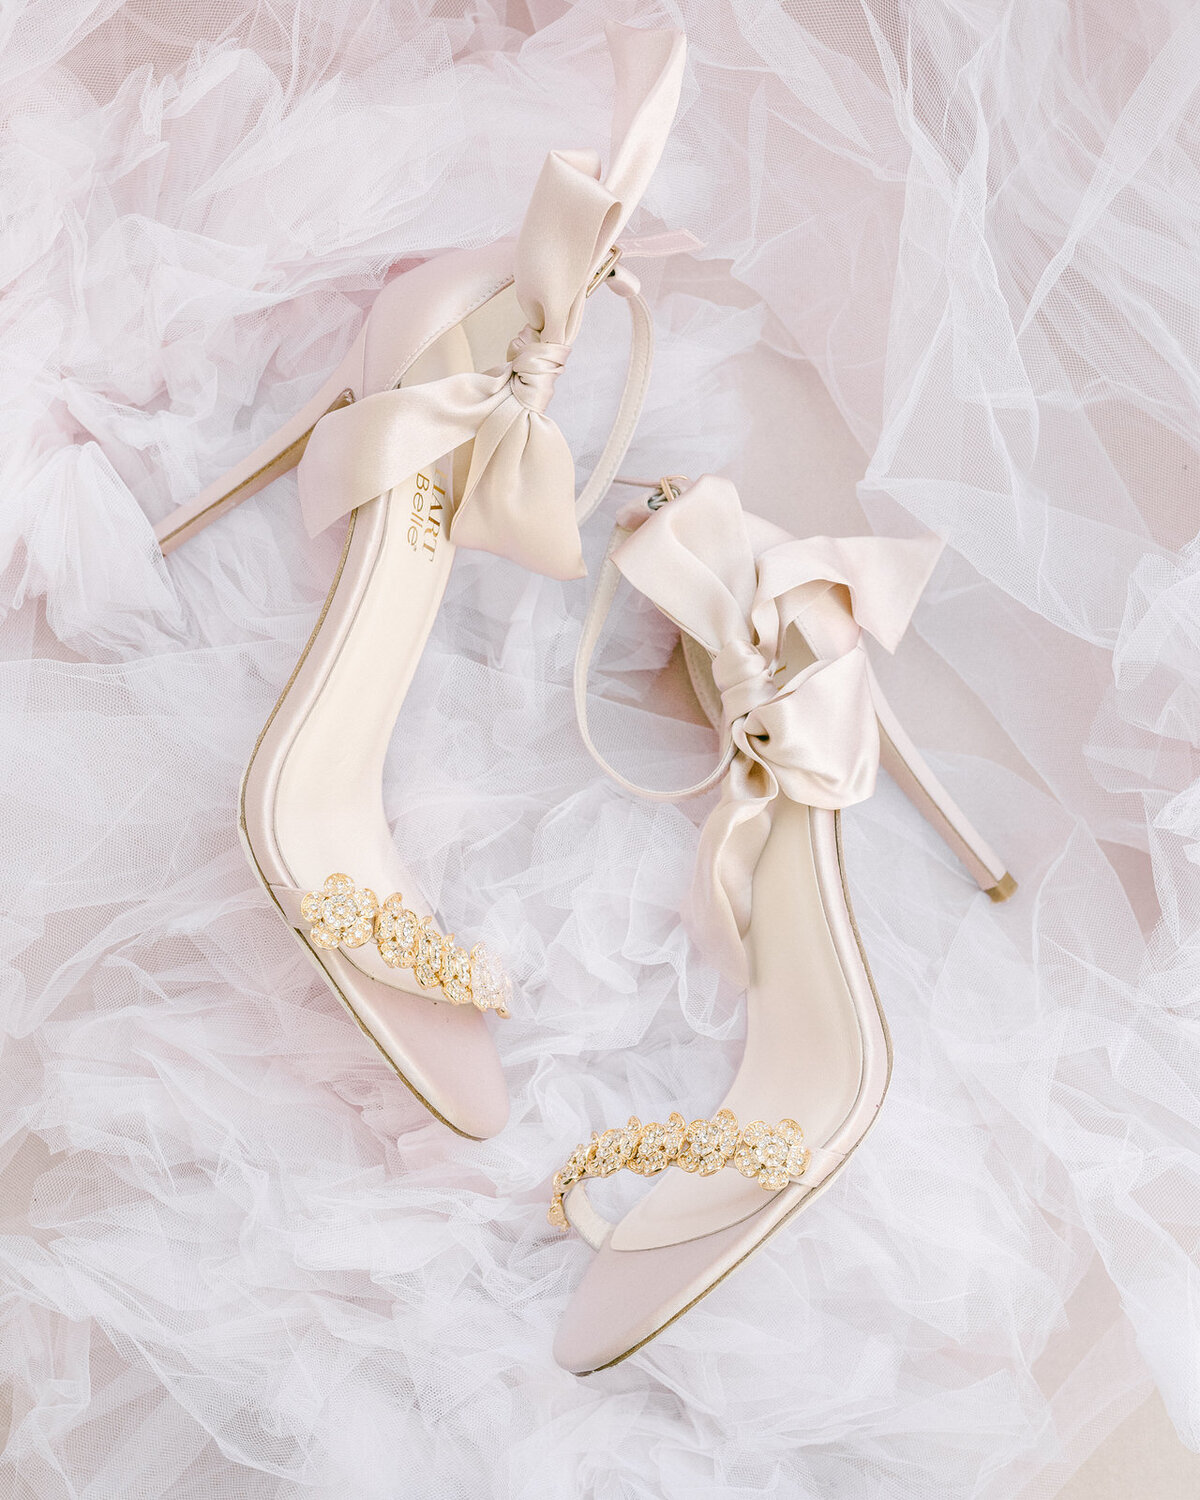 Bella Belle Shoes - Mariee - Serenity Photography -1